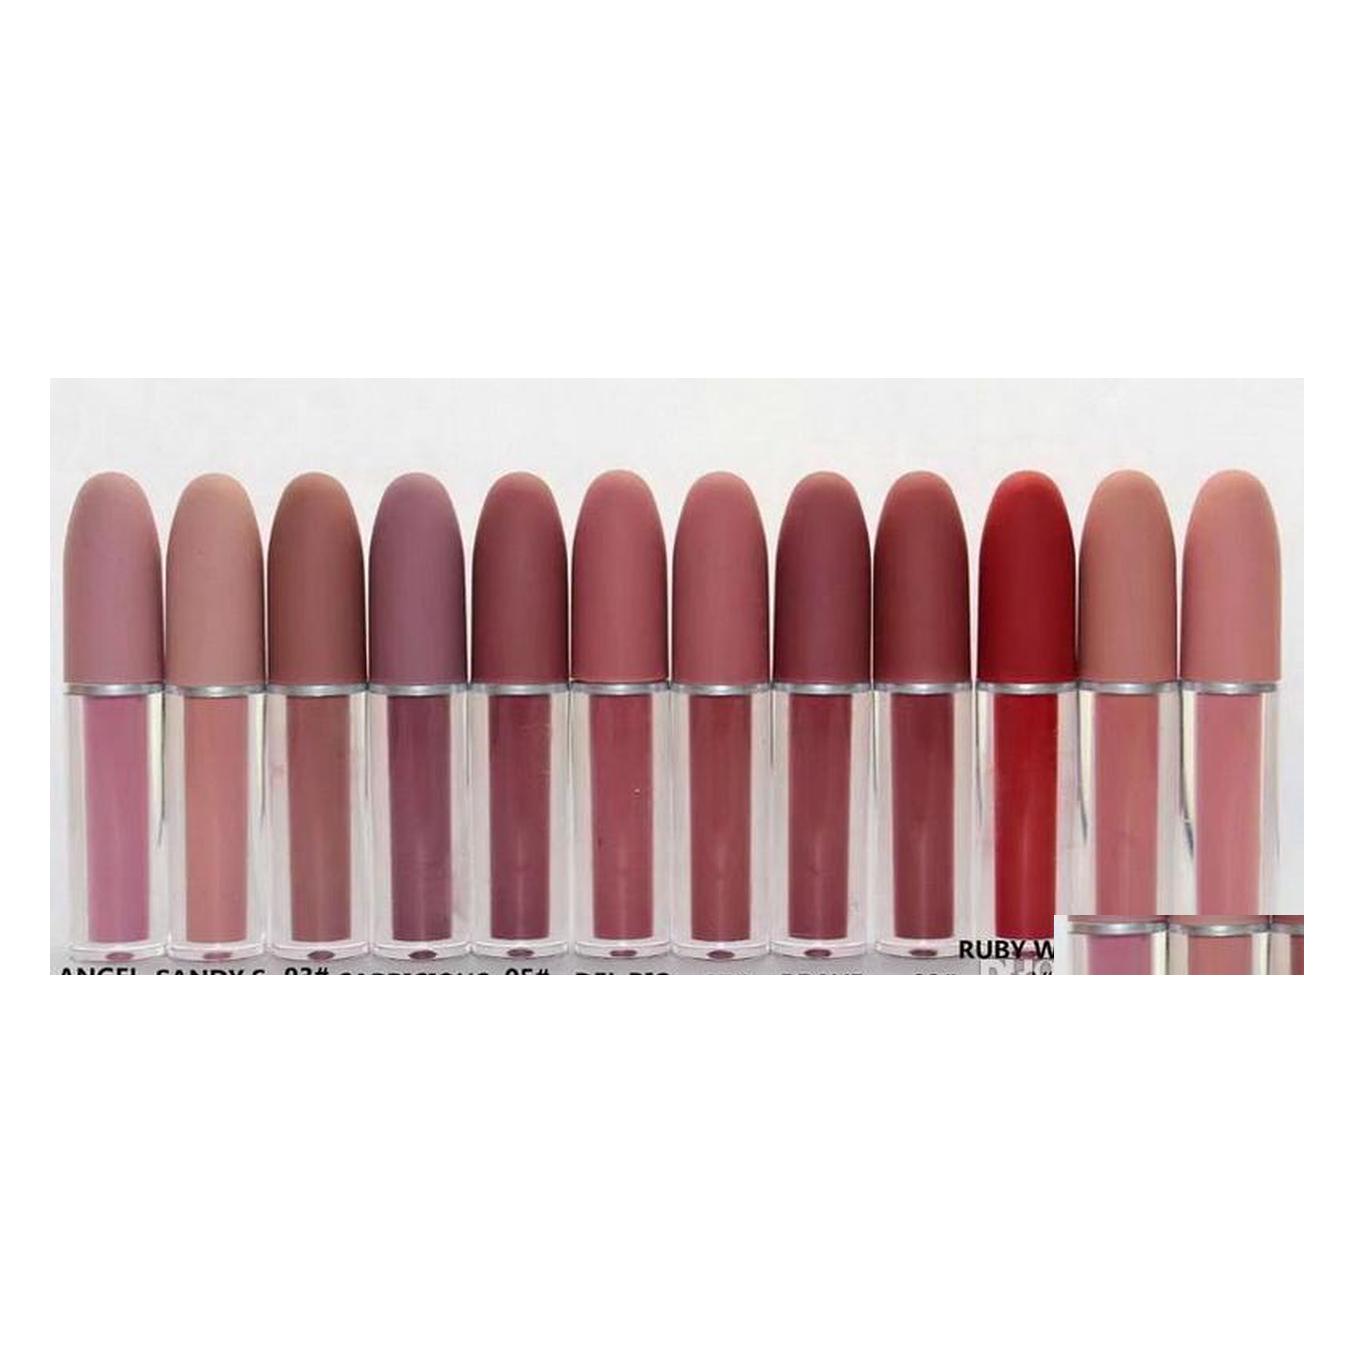 

Lip Gloss Makeup Liquid Lipstick Natural Moisturizer 12 Different Color With English Coloris Make Up Lipgloss Drop Delivery Health B Dh8Ib, Randomly sended color